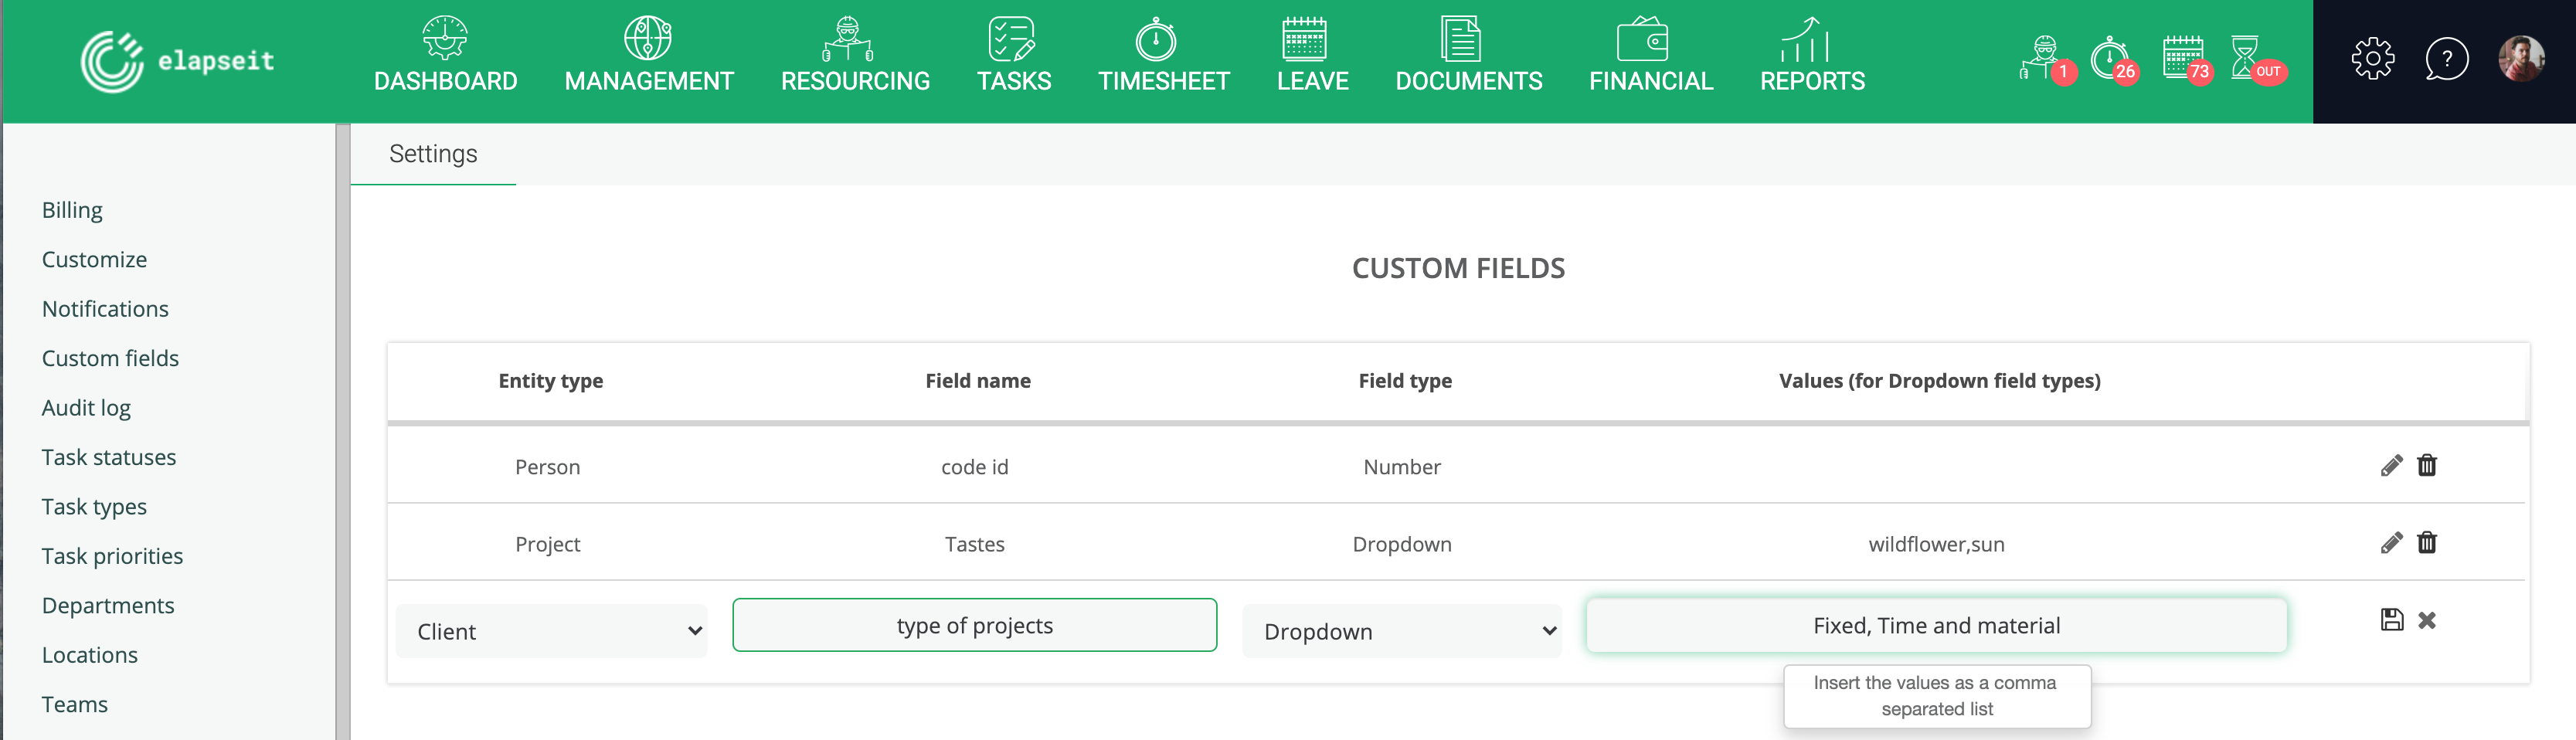 Type of Custom fields for Client